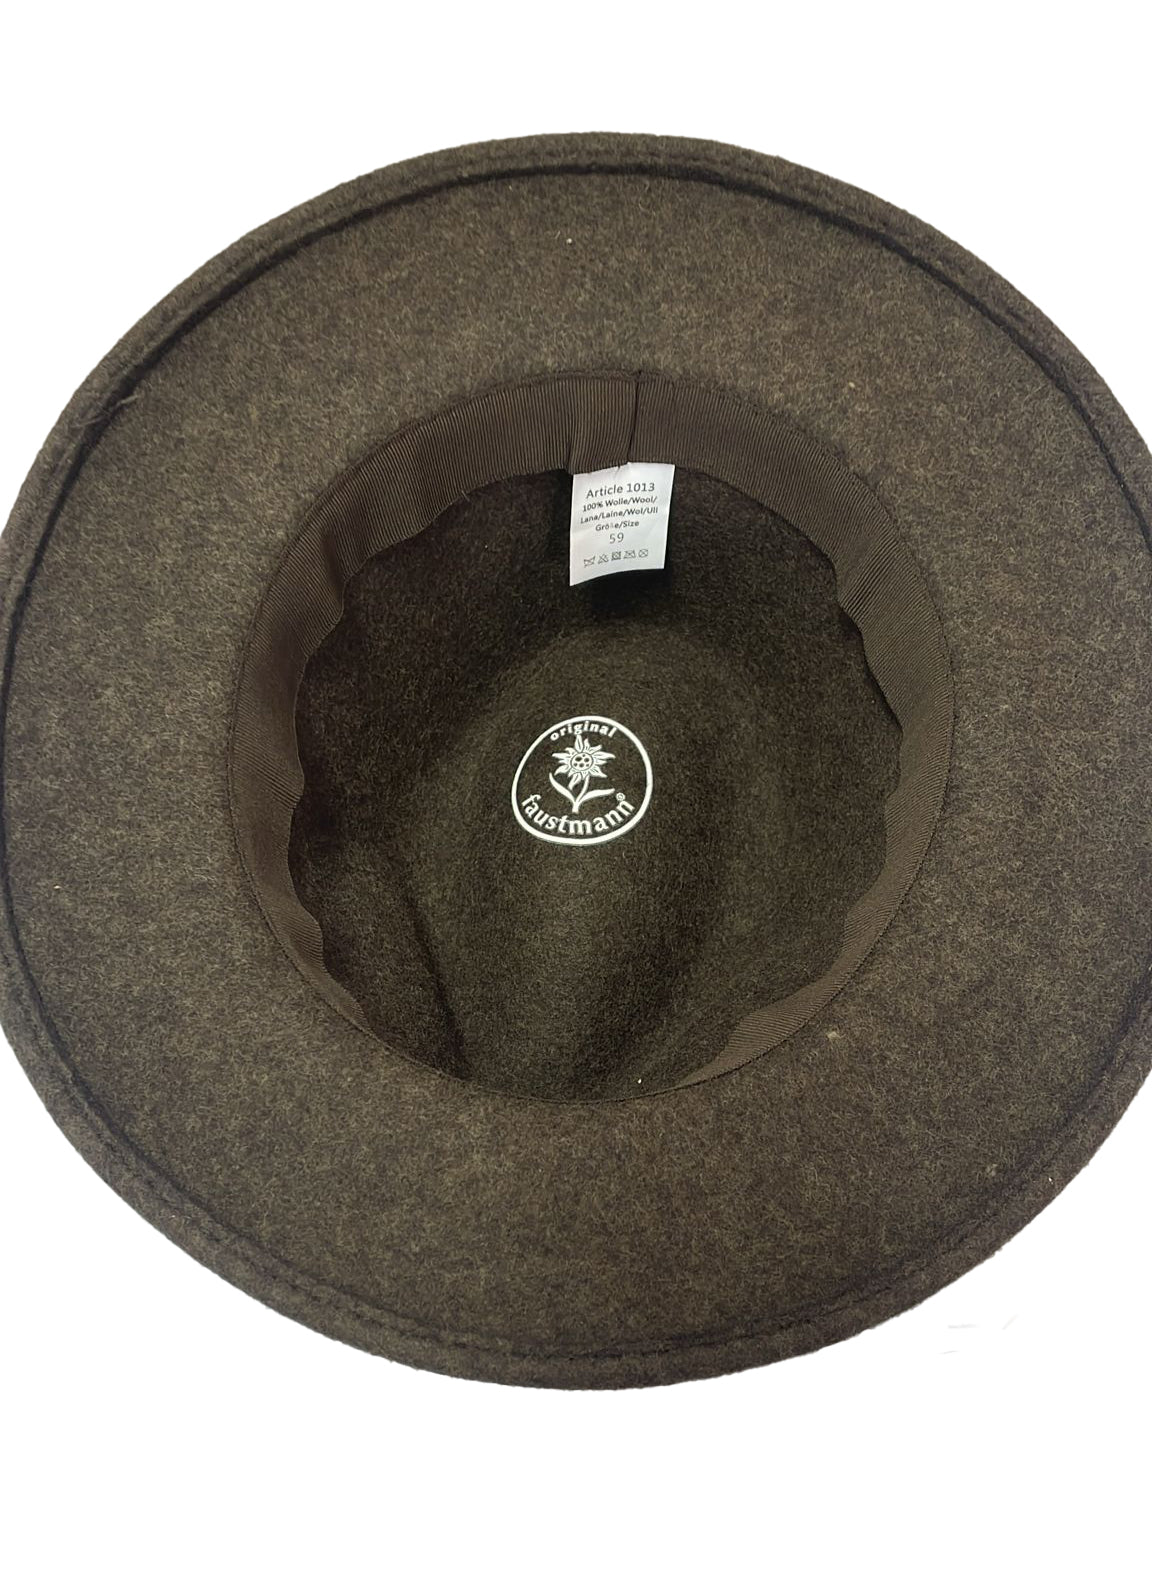 Crumplable wool felt hat for women and men with a two-colored leather hat band